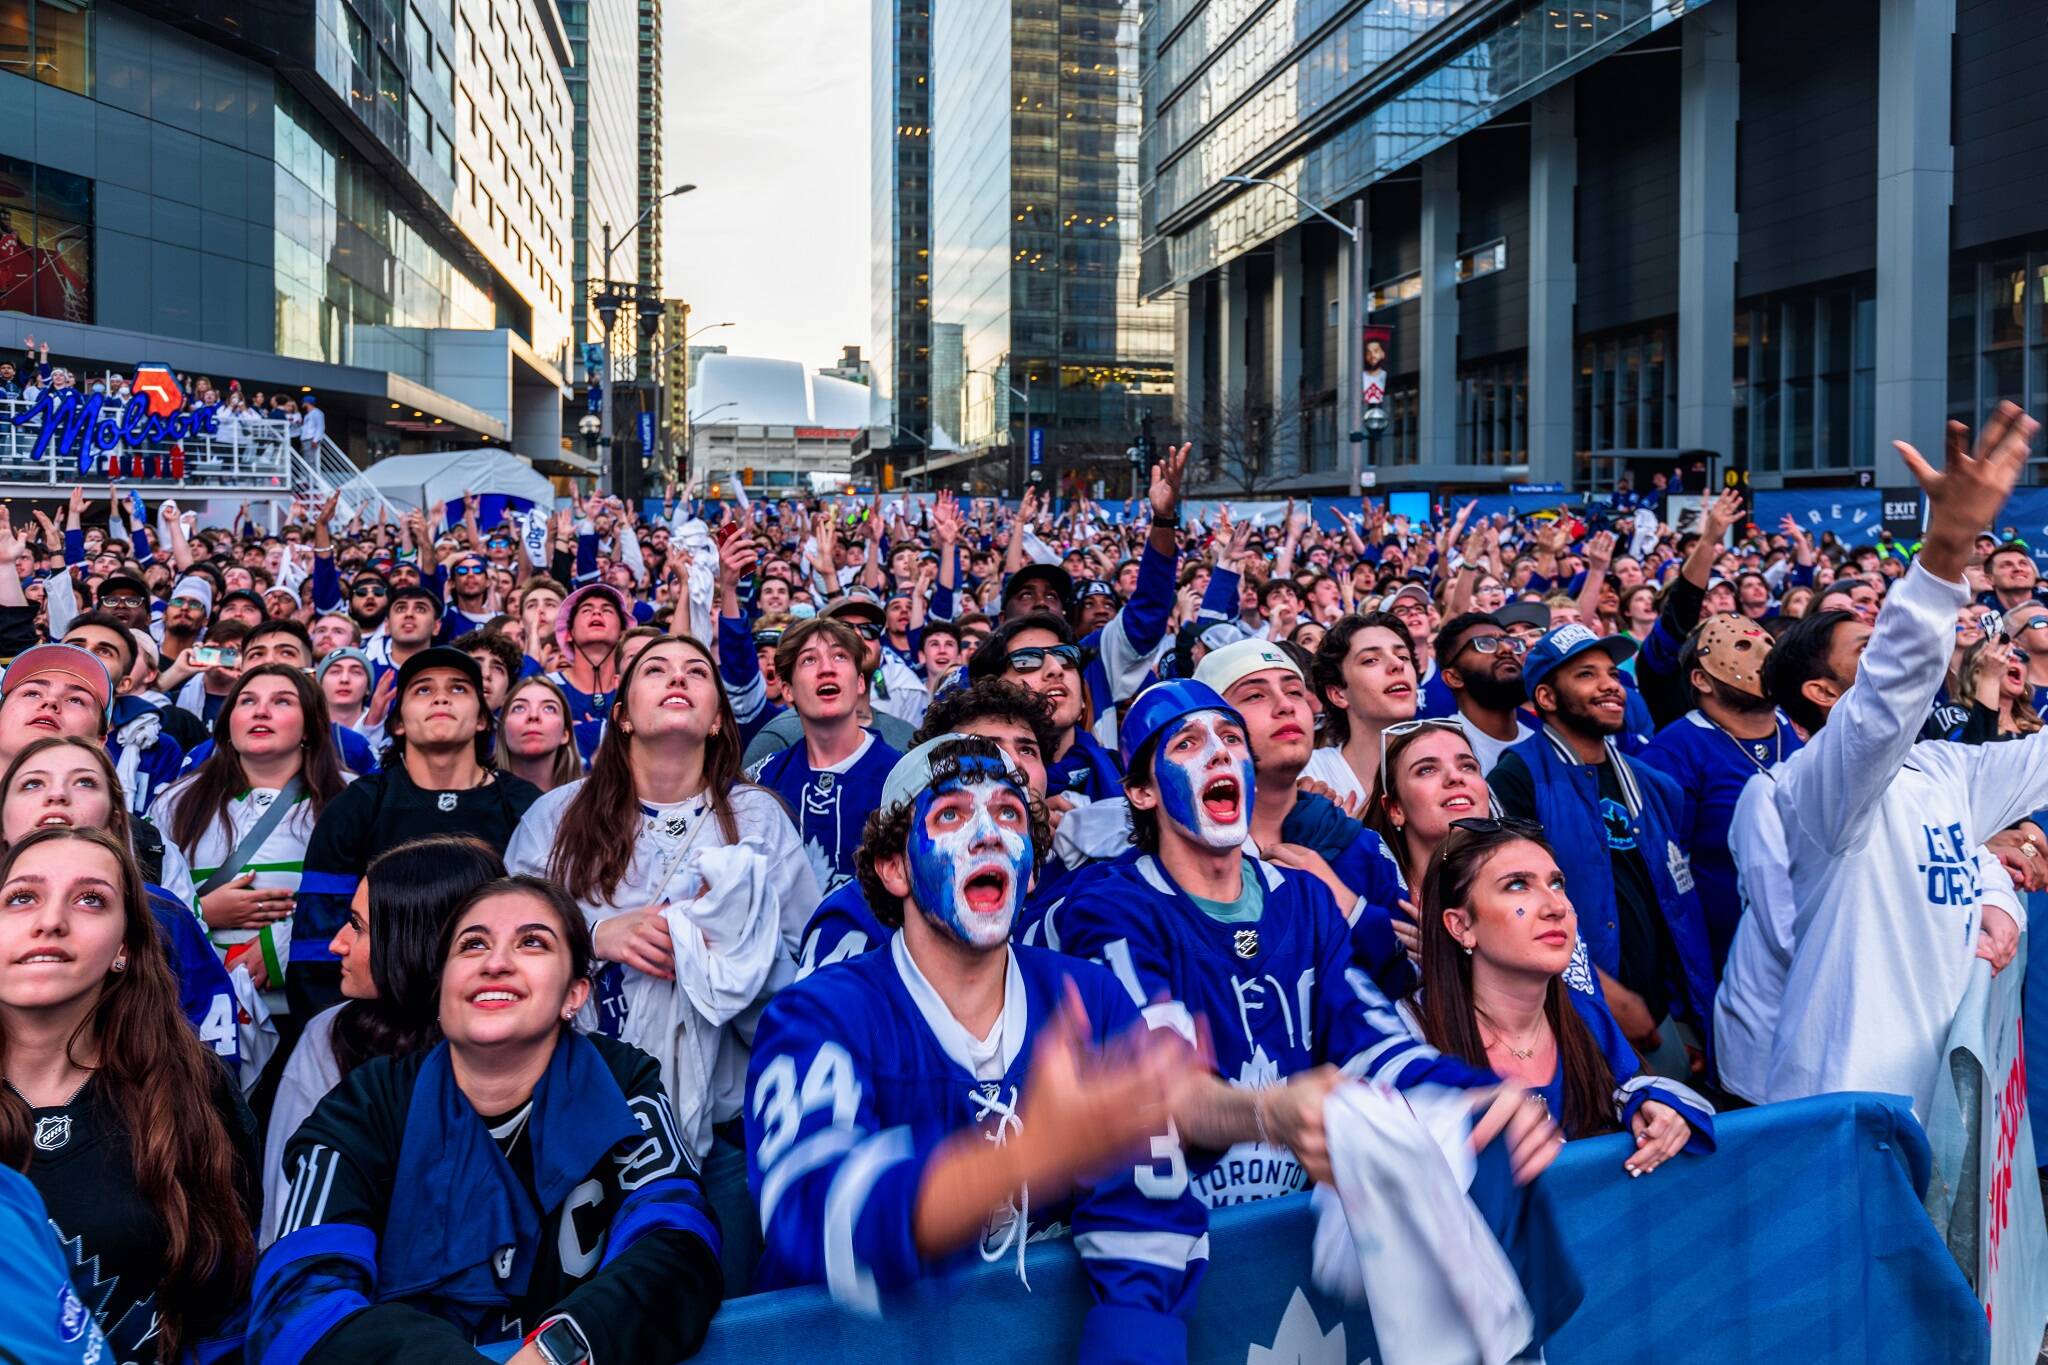 Toronto Maple Leafs fans on whether they'll ever give up